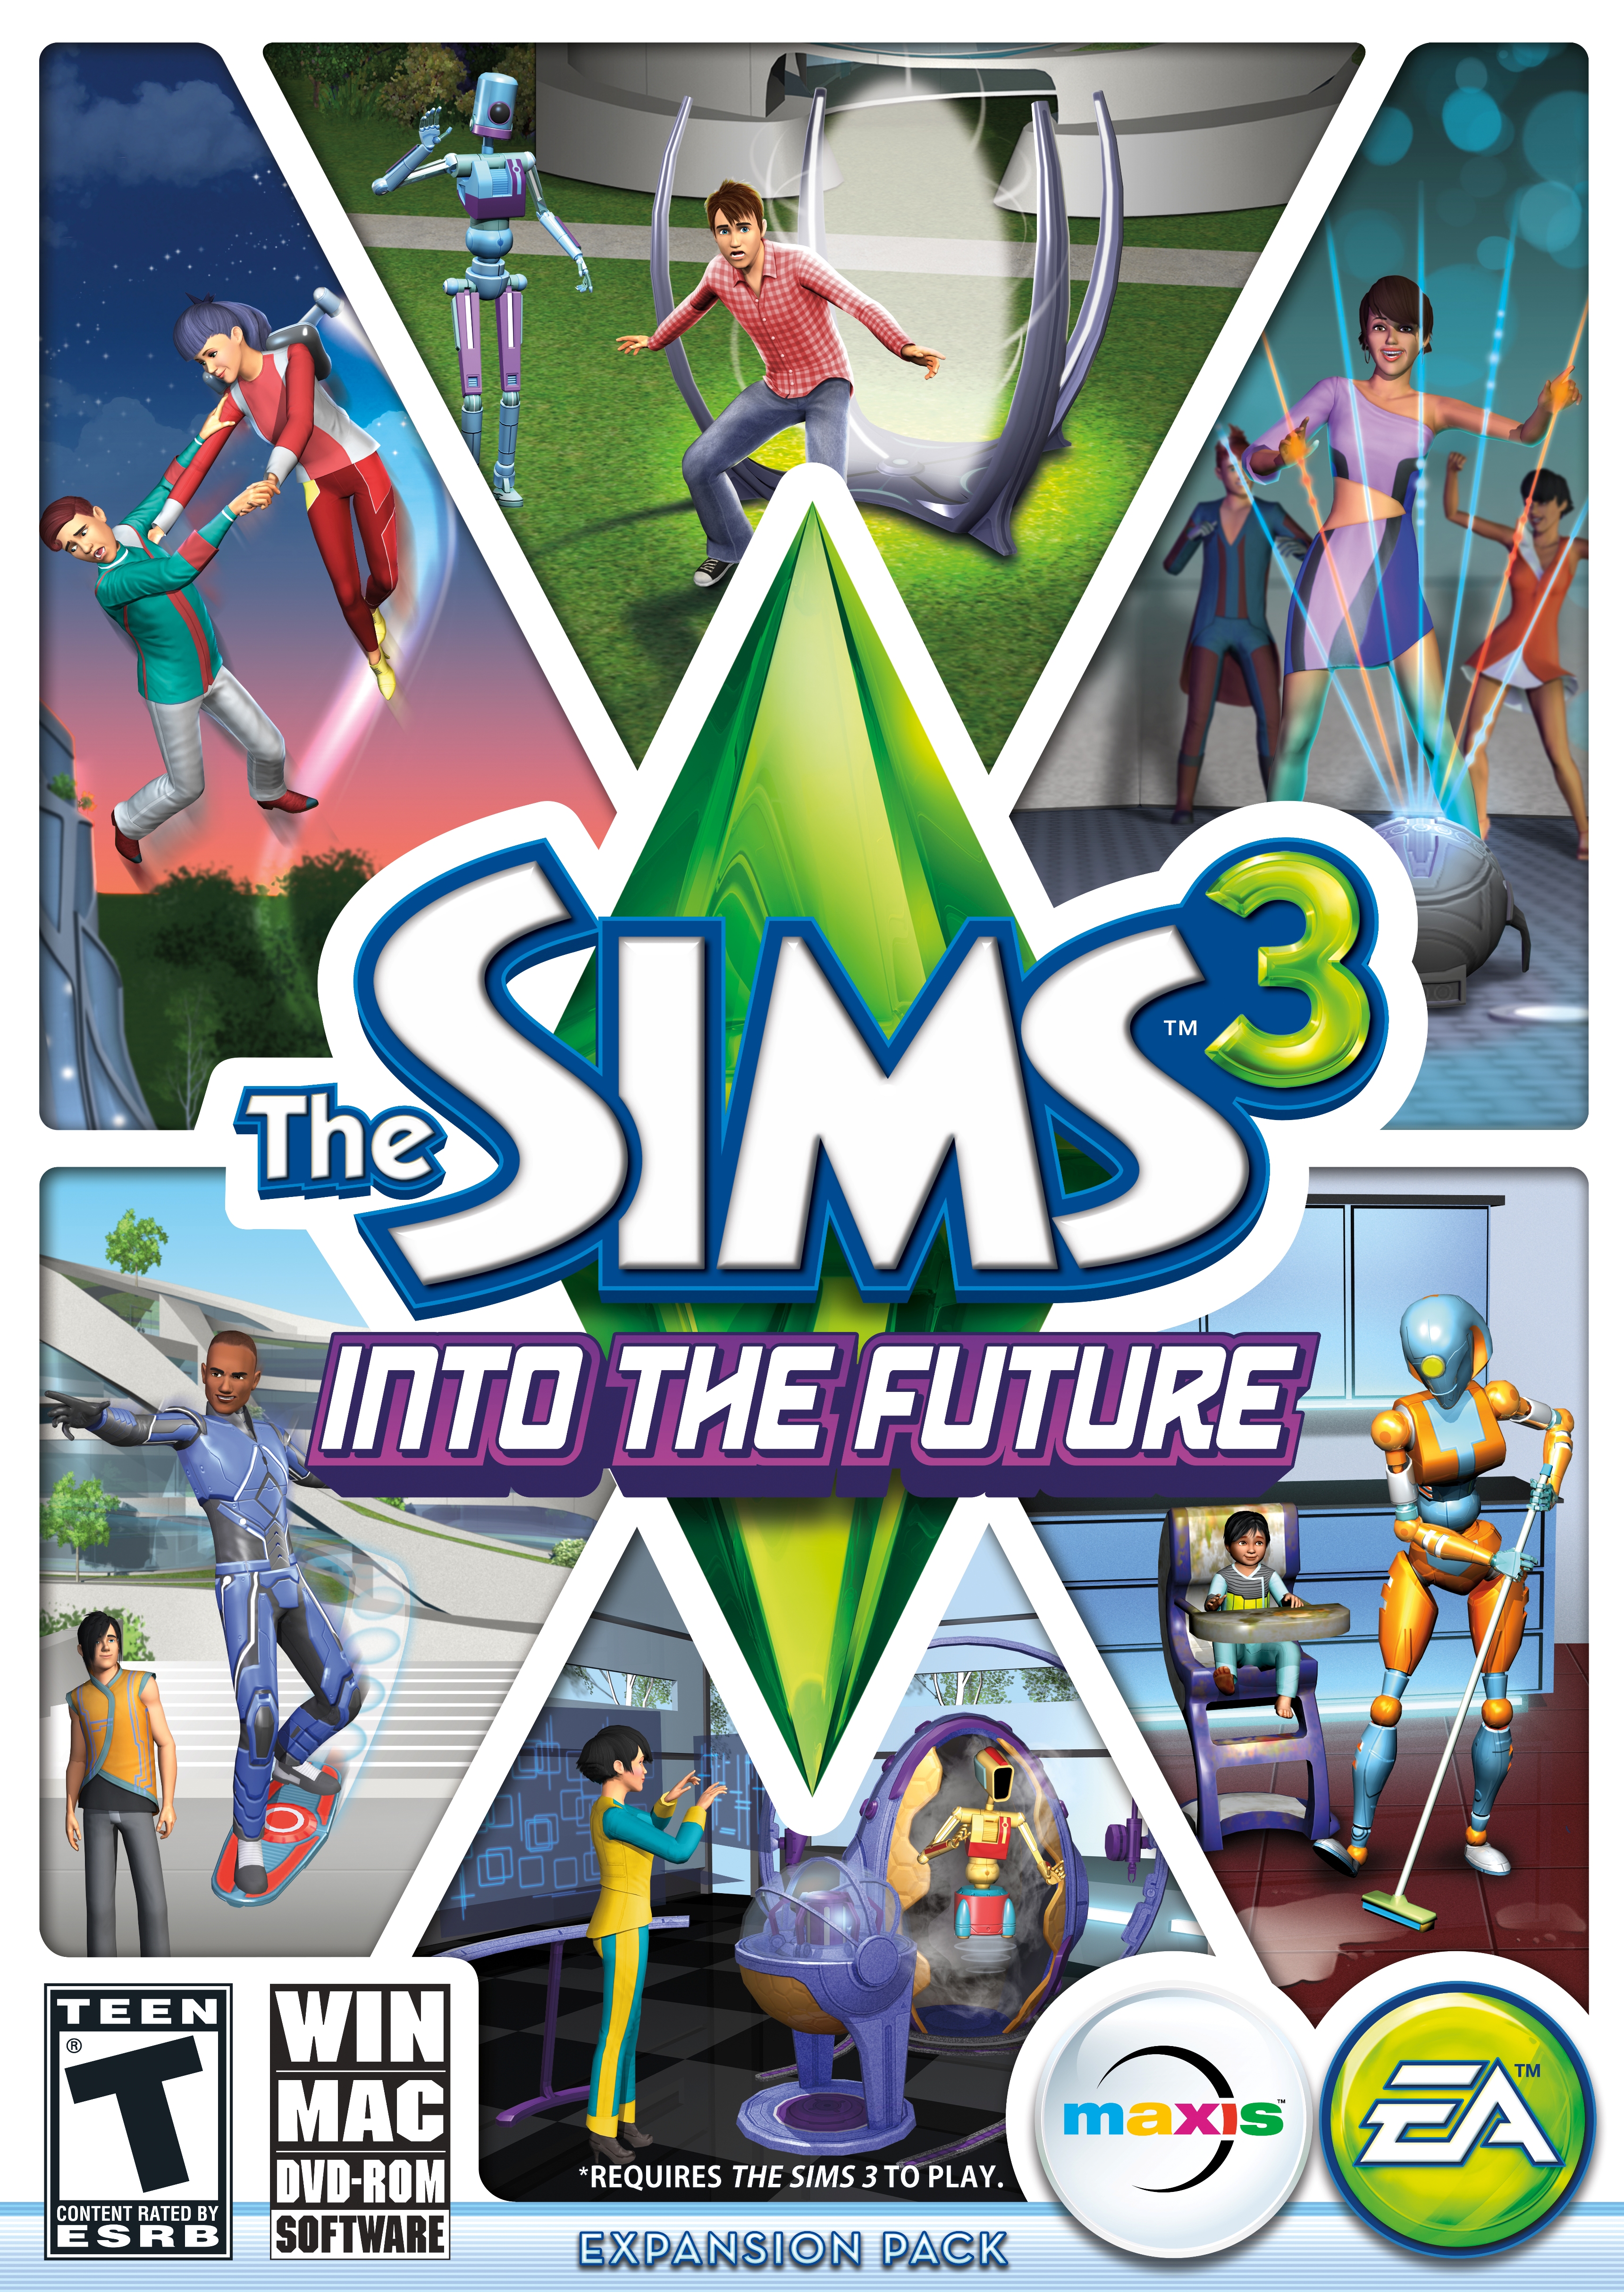 http://images3.wikia.nocookie.net/__cb20130808151130/sims/images/3/30/The_Sims_3_Into_The_Future_Cover.jpeg